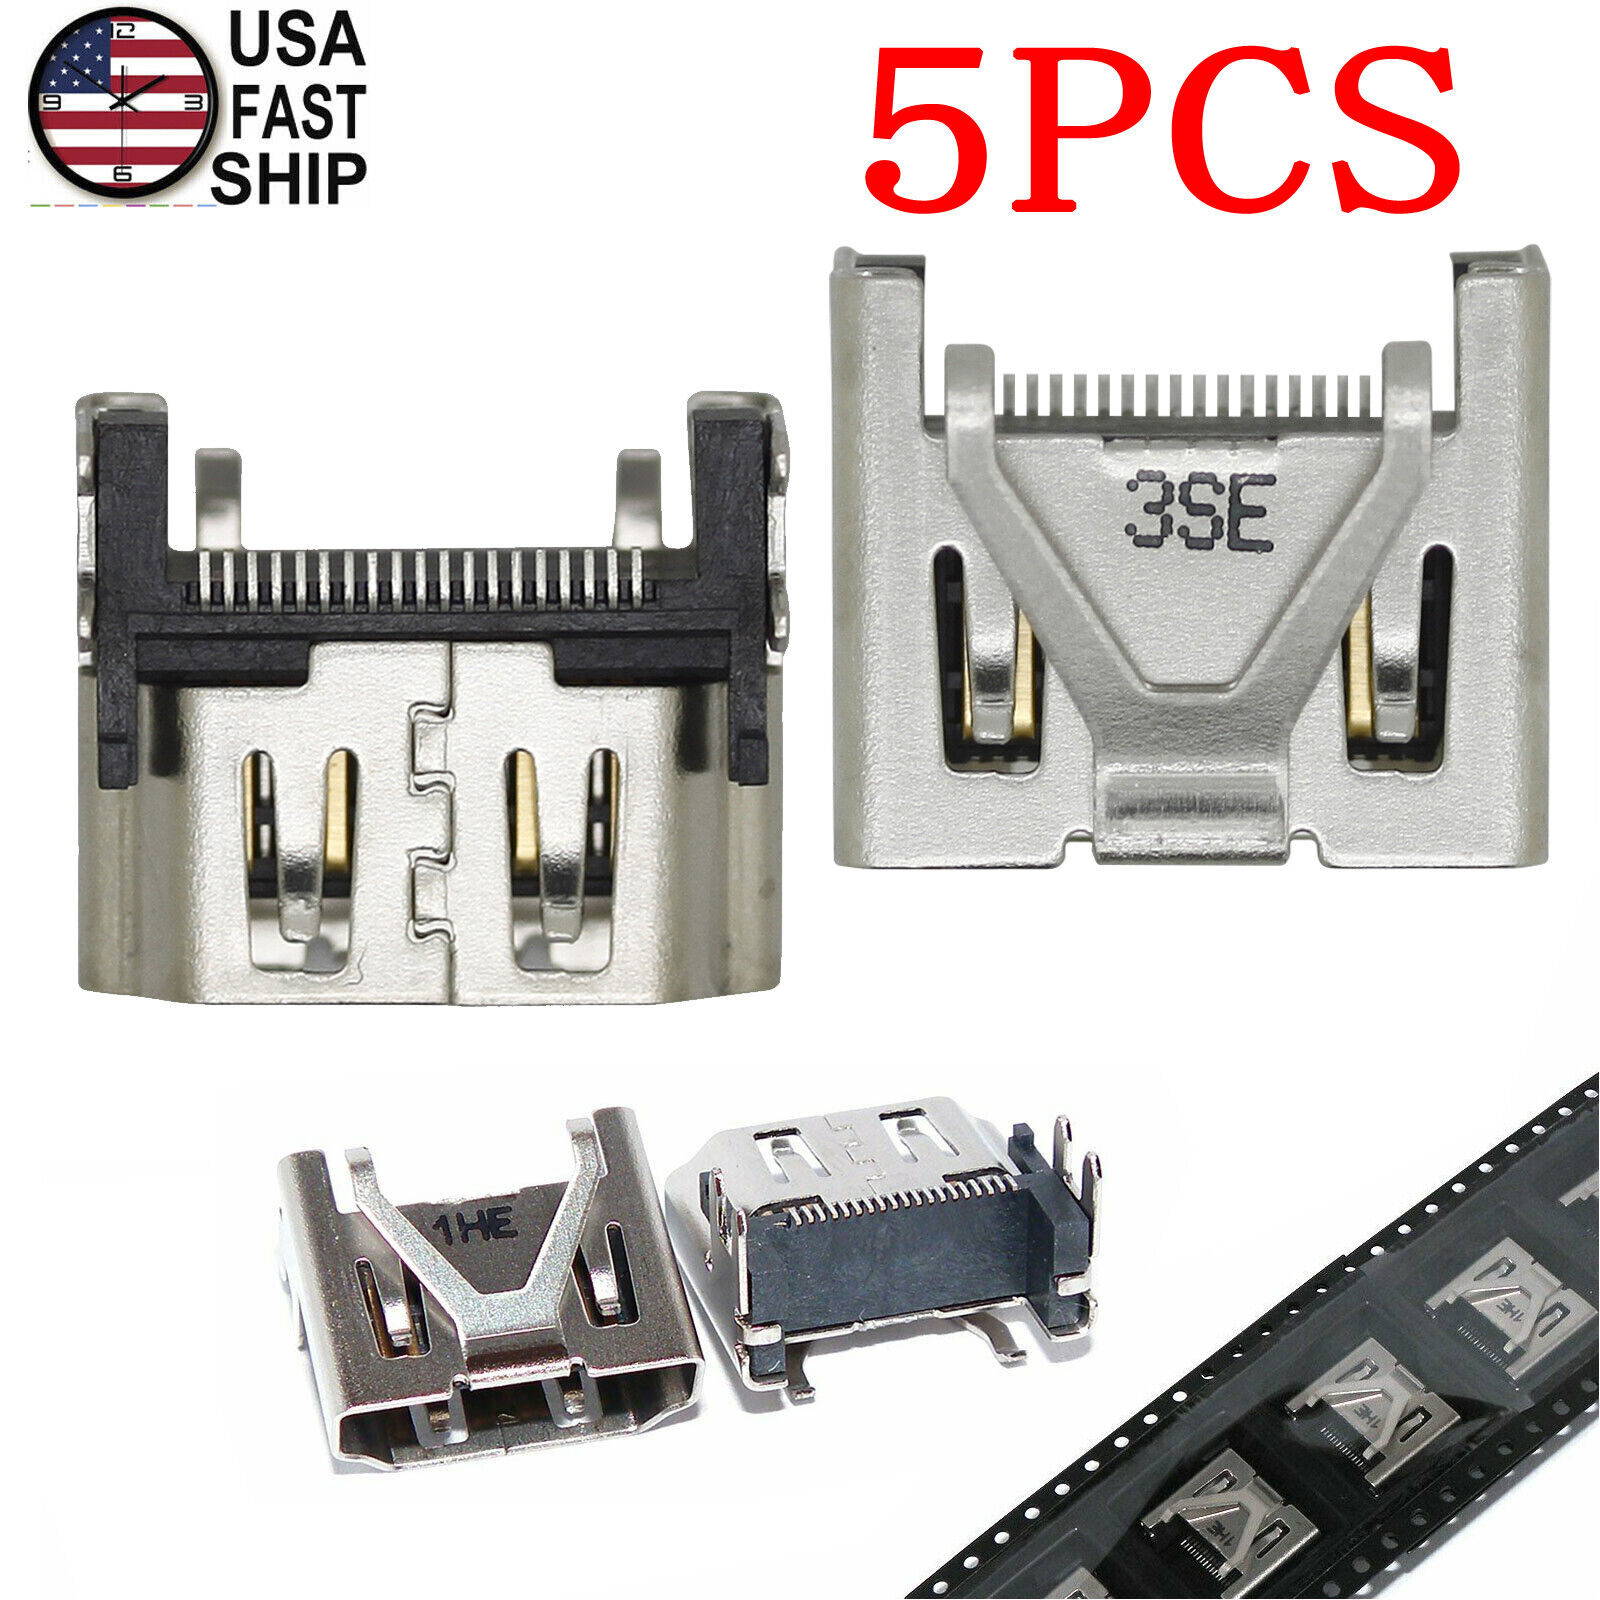 5PCS HDMI Port Socket Interface Connector For Sony PlayStation 4 PS4 Slim / Pro Unbranded Does not apply